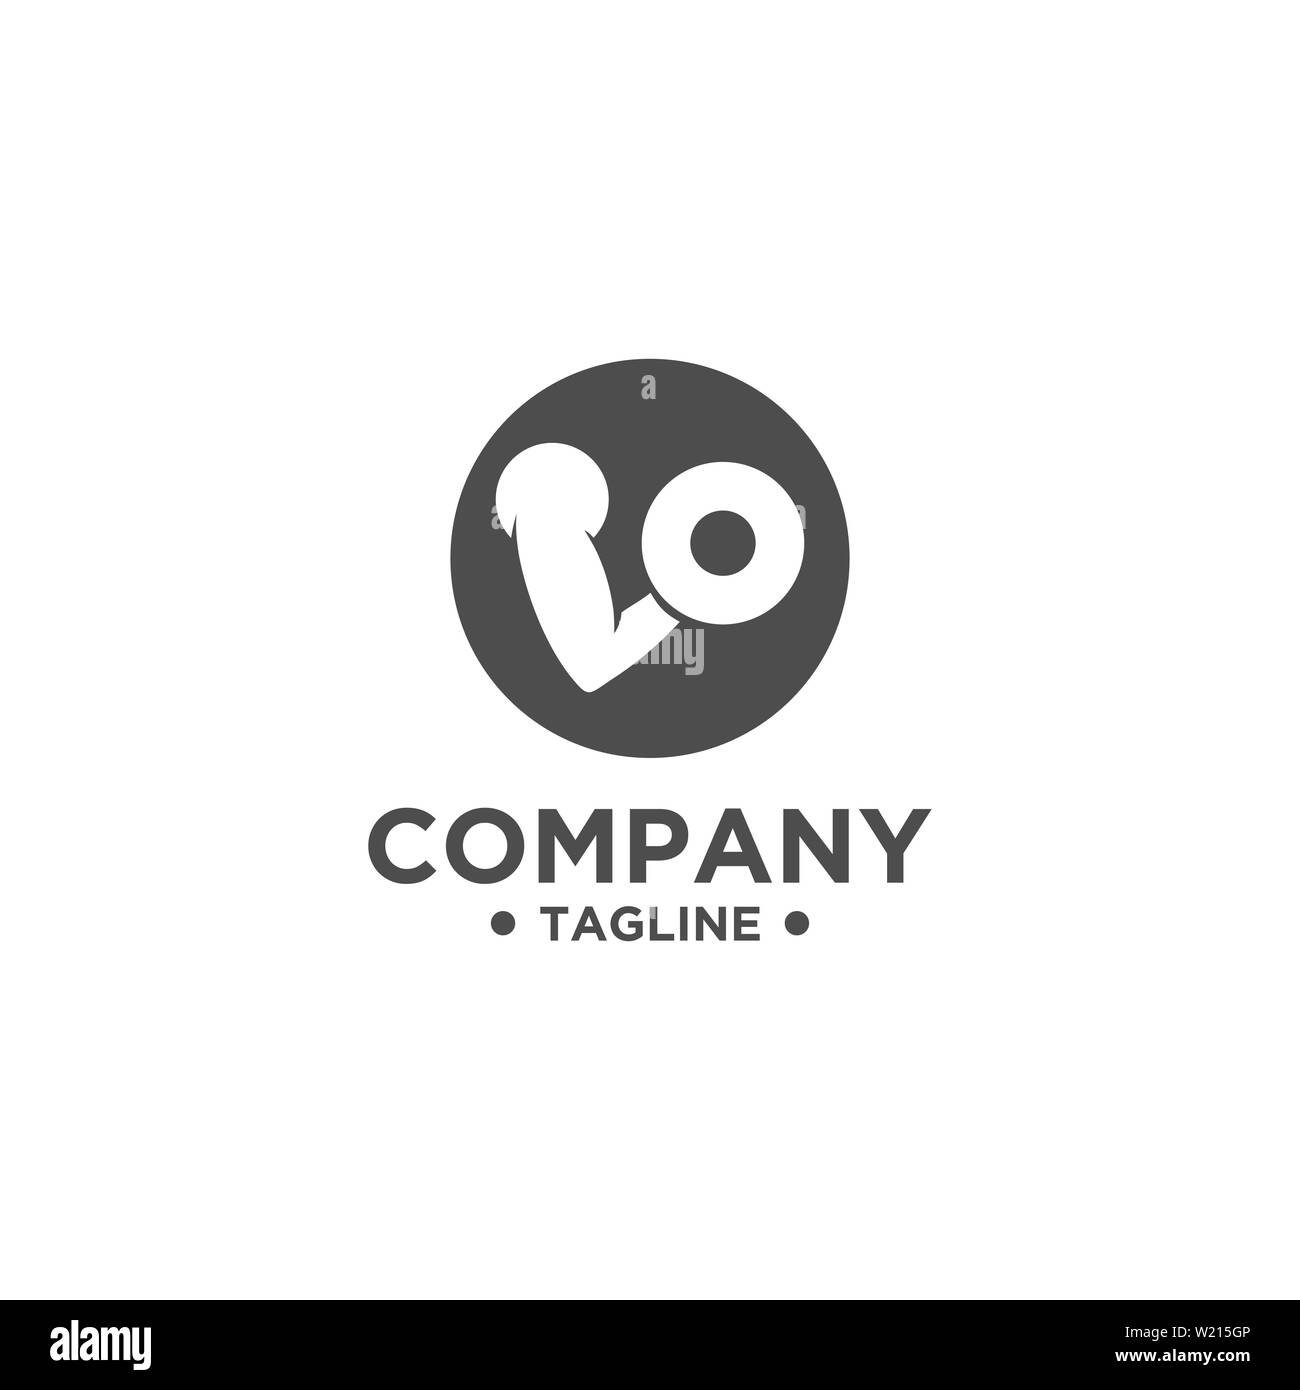 Fitness Gym Logo Design Template. Healthy Life Symbol. Sports Brand or Company Stock Photo